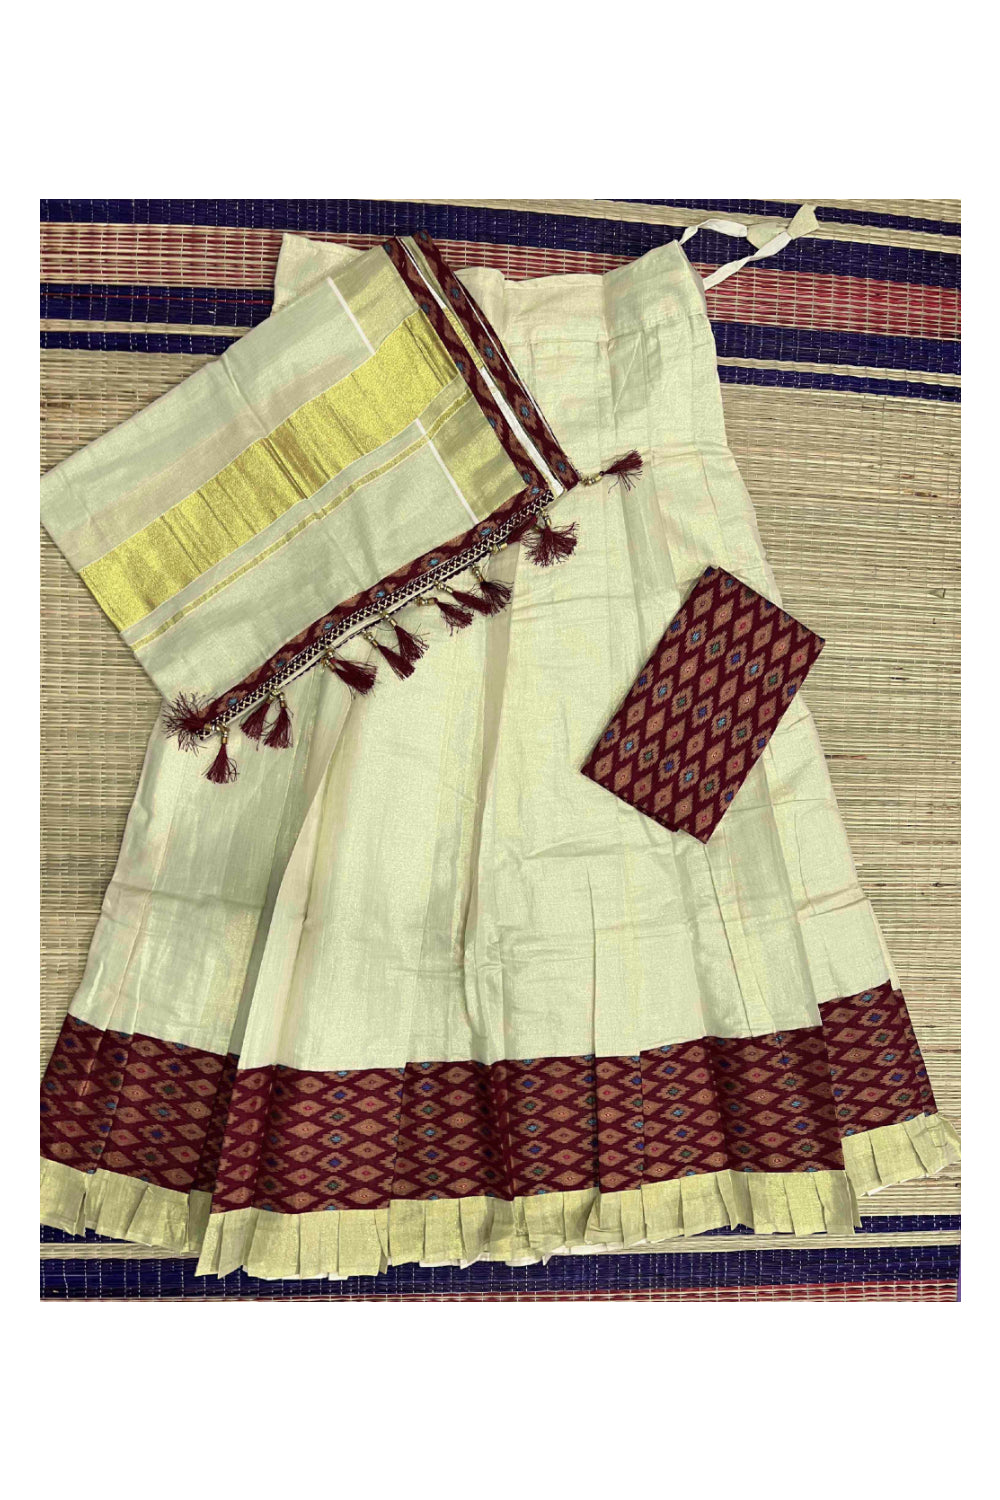 Kerala Tissue Stitched Dhavani Set with Blouse Piece and Neriyathu in with Maroon Accents